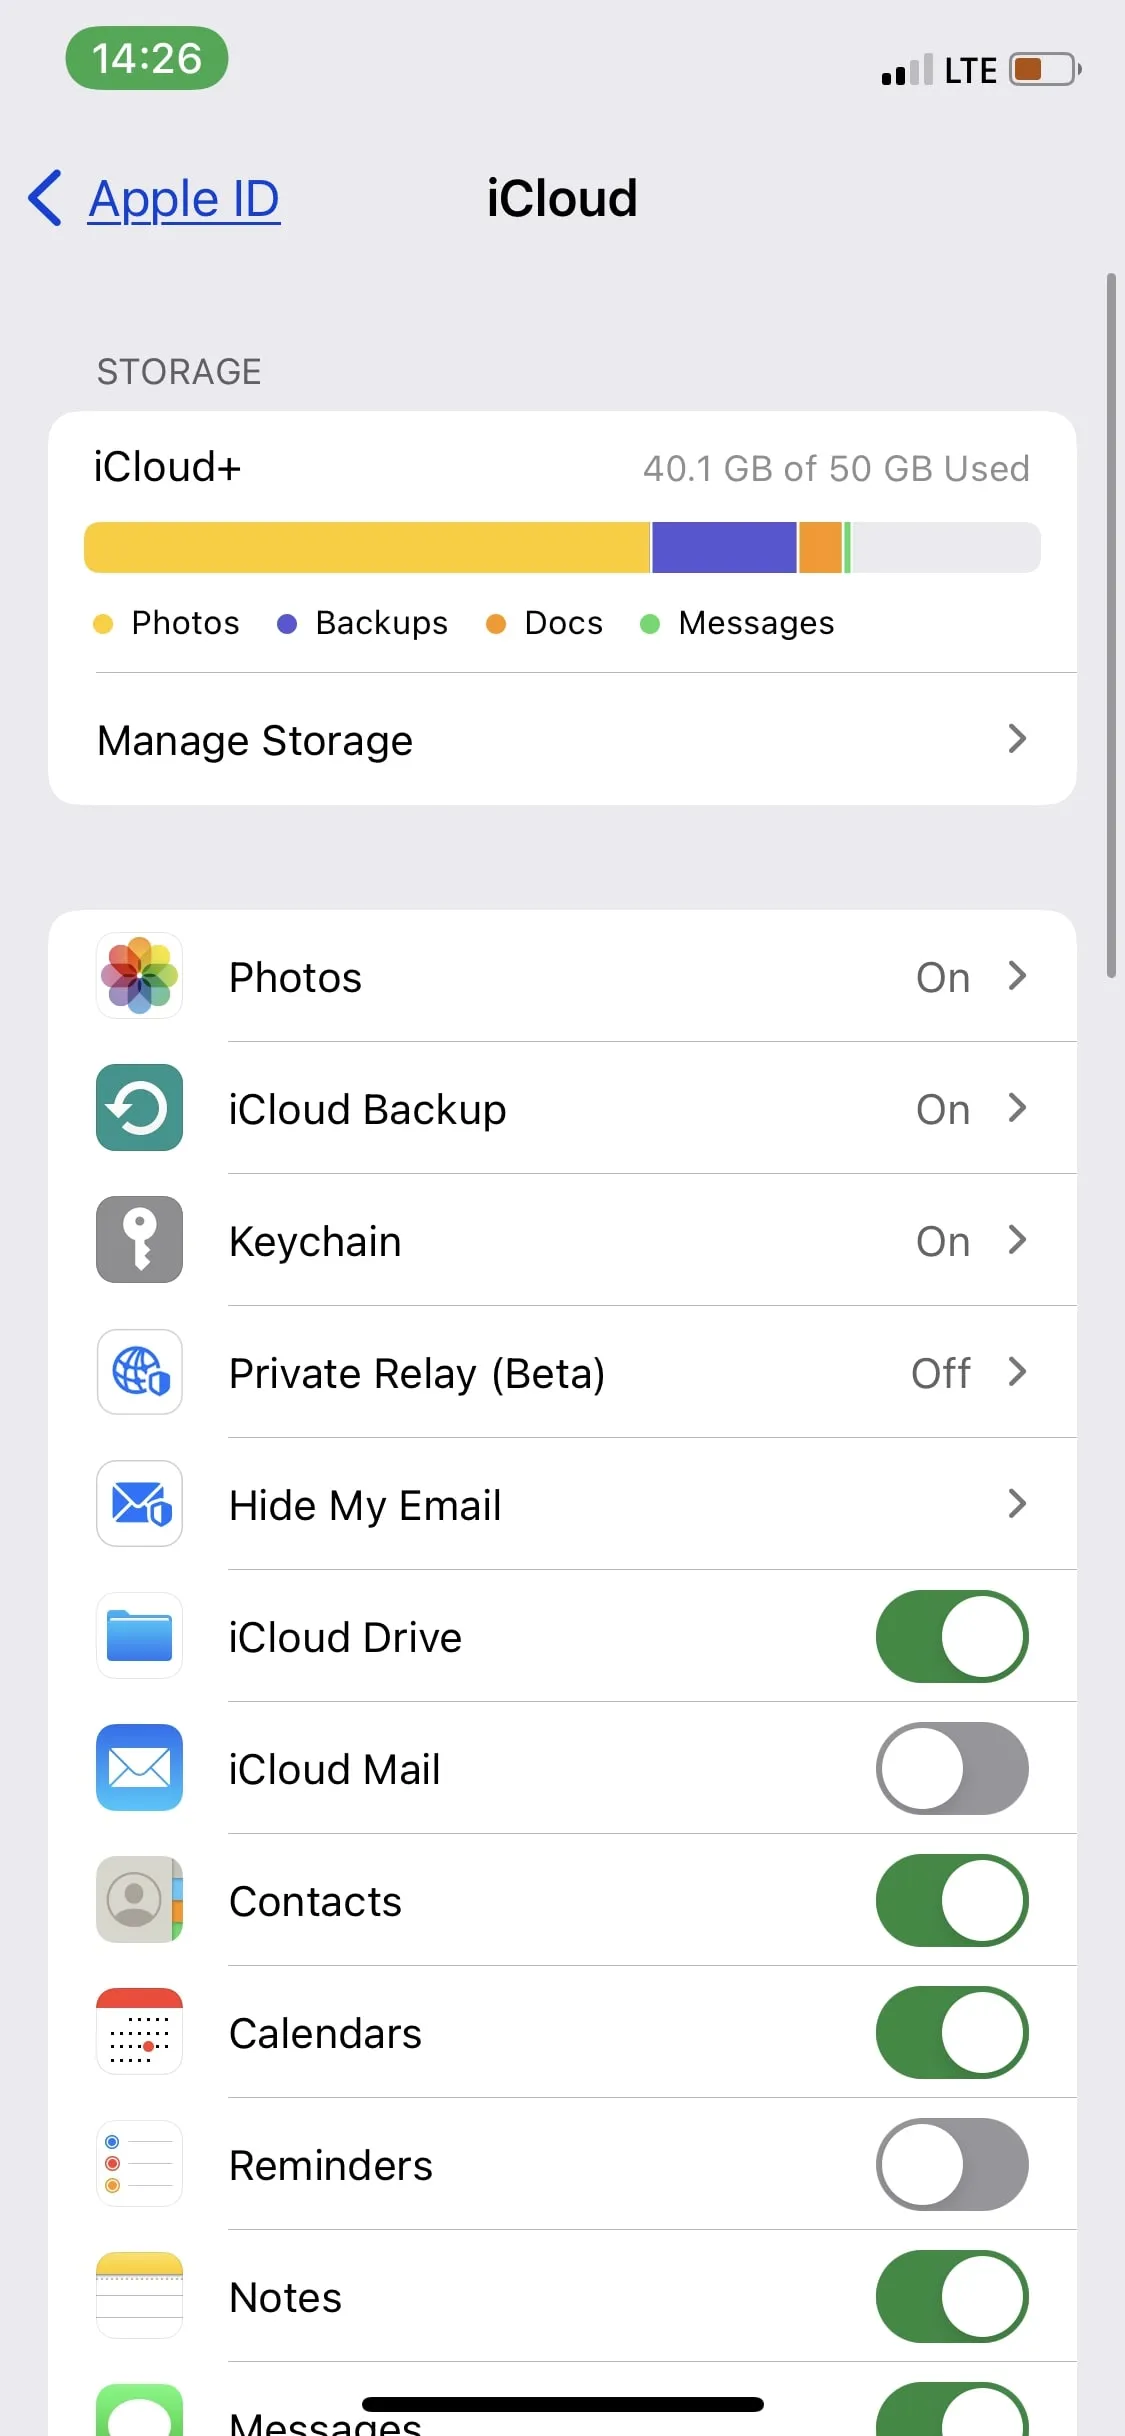 iCloud photos not syncing